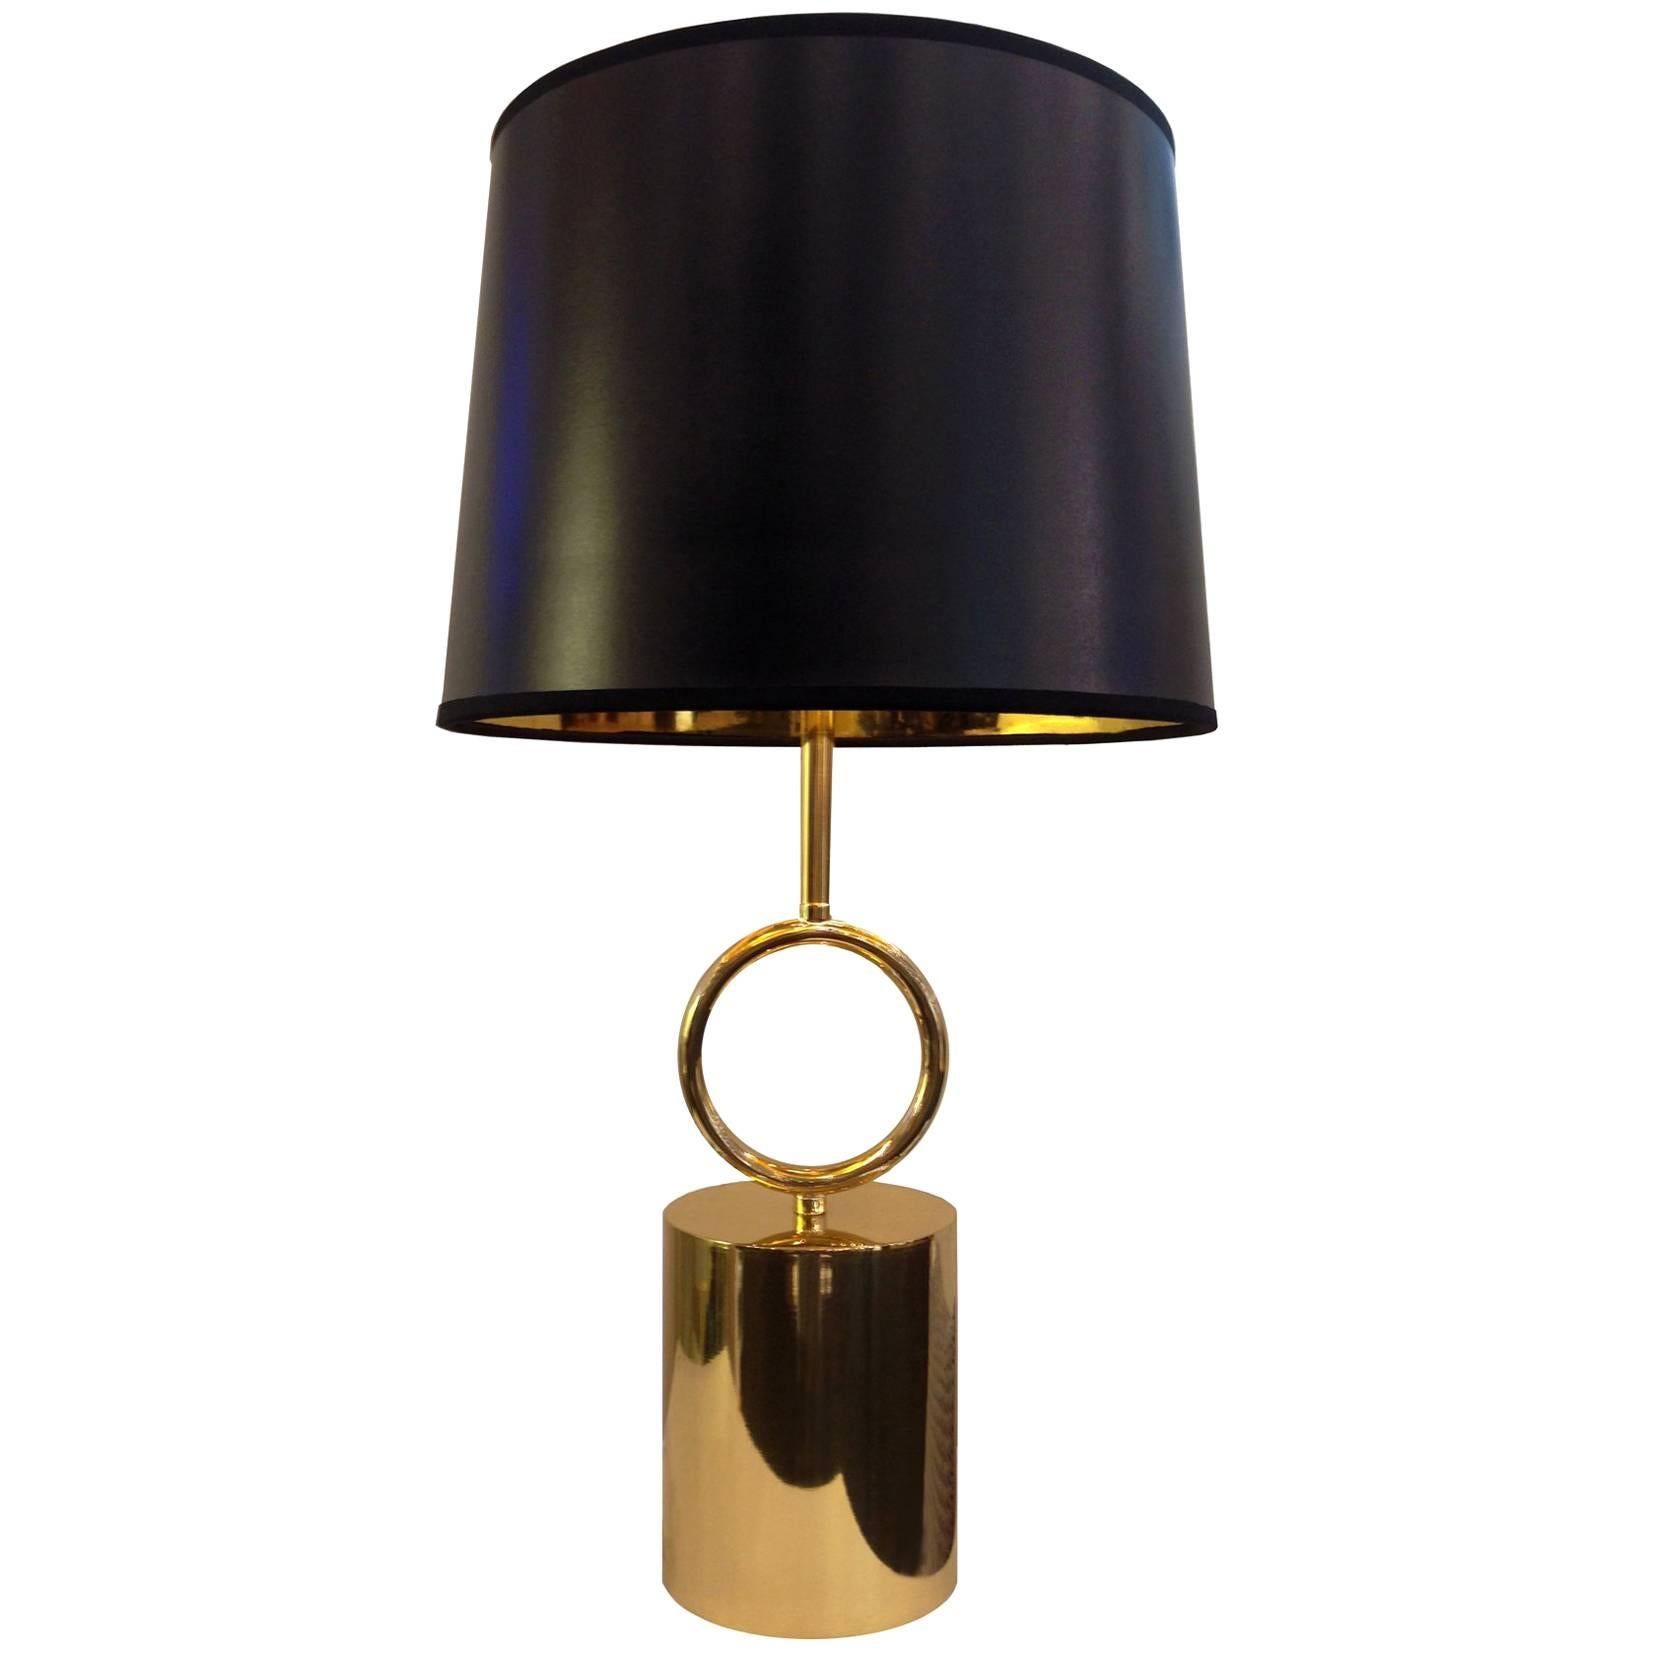 New Brass Table Lamp, "Hoop" Polished Brass or Rustic Bronze, Made in Italy For Sale